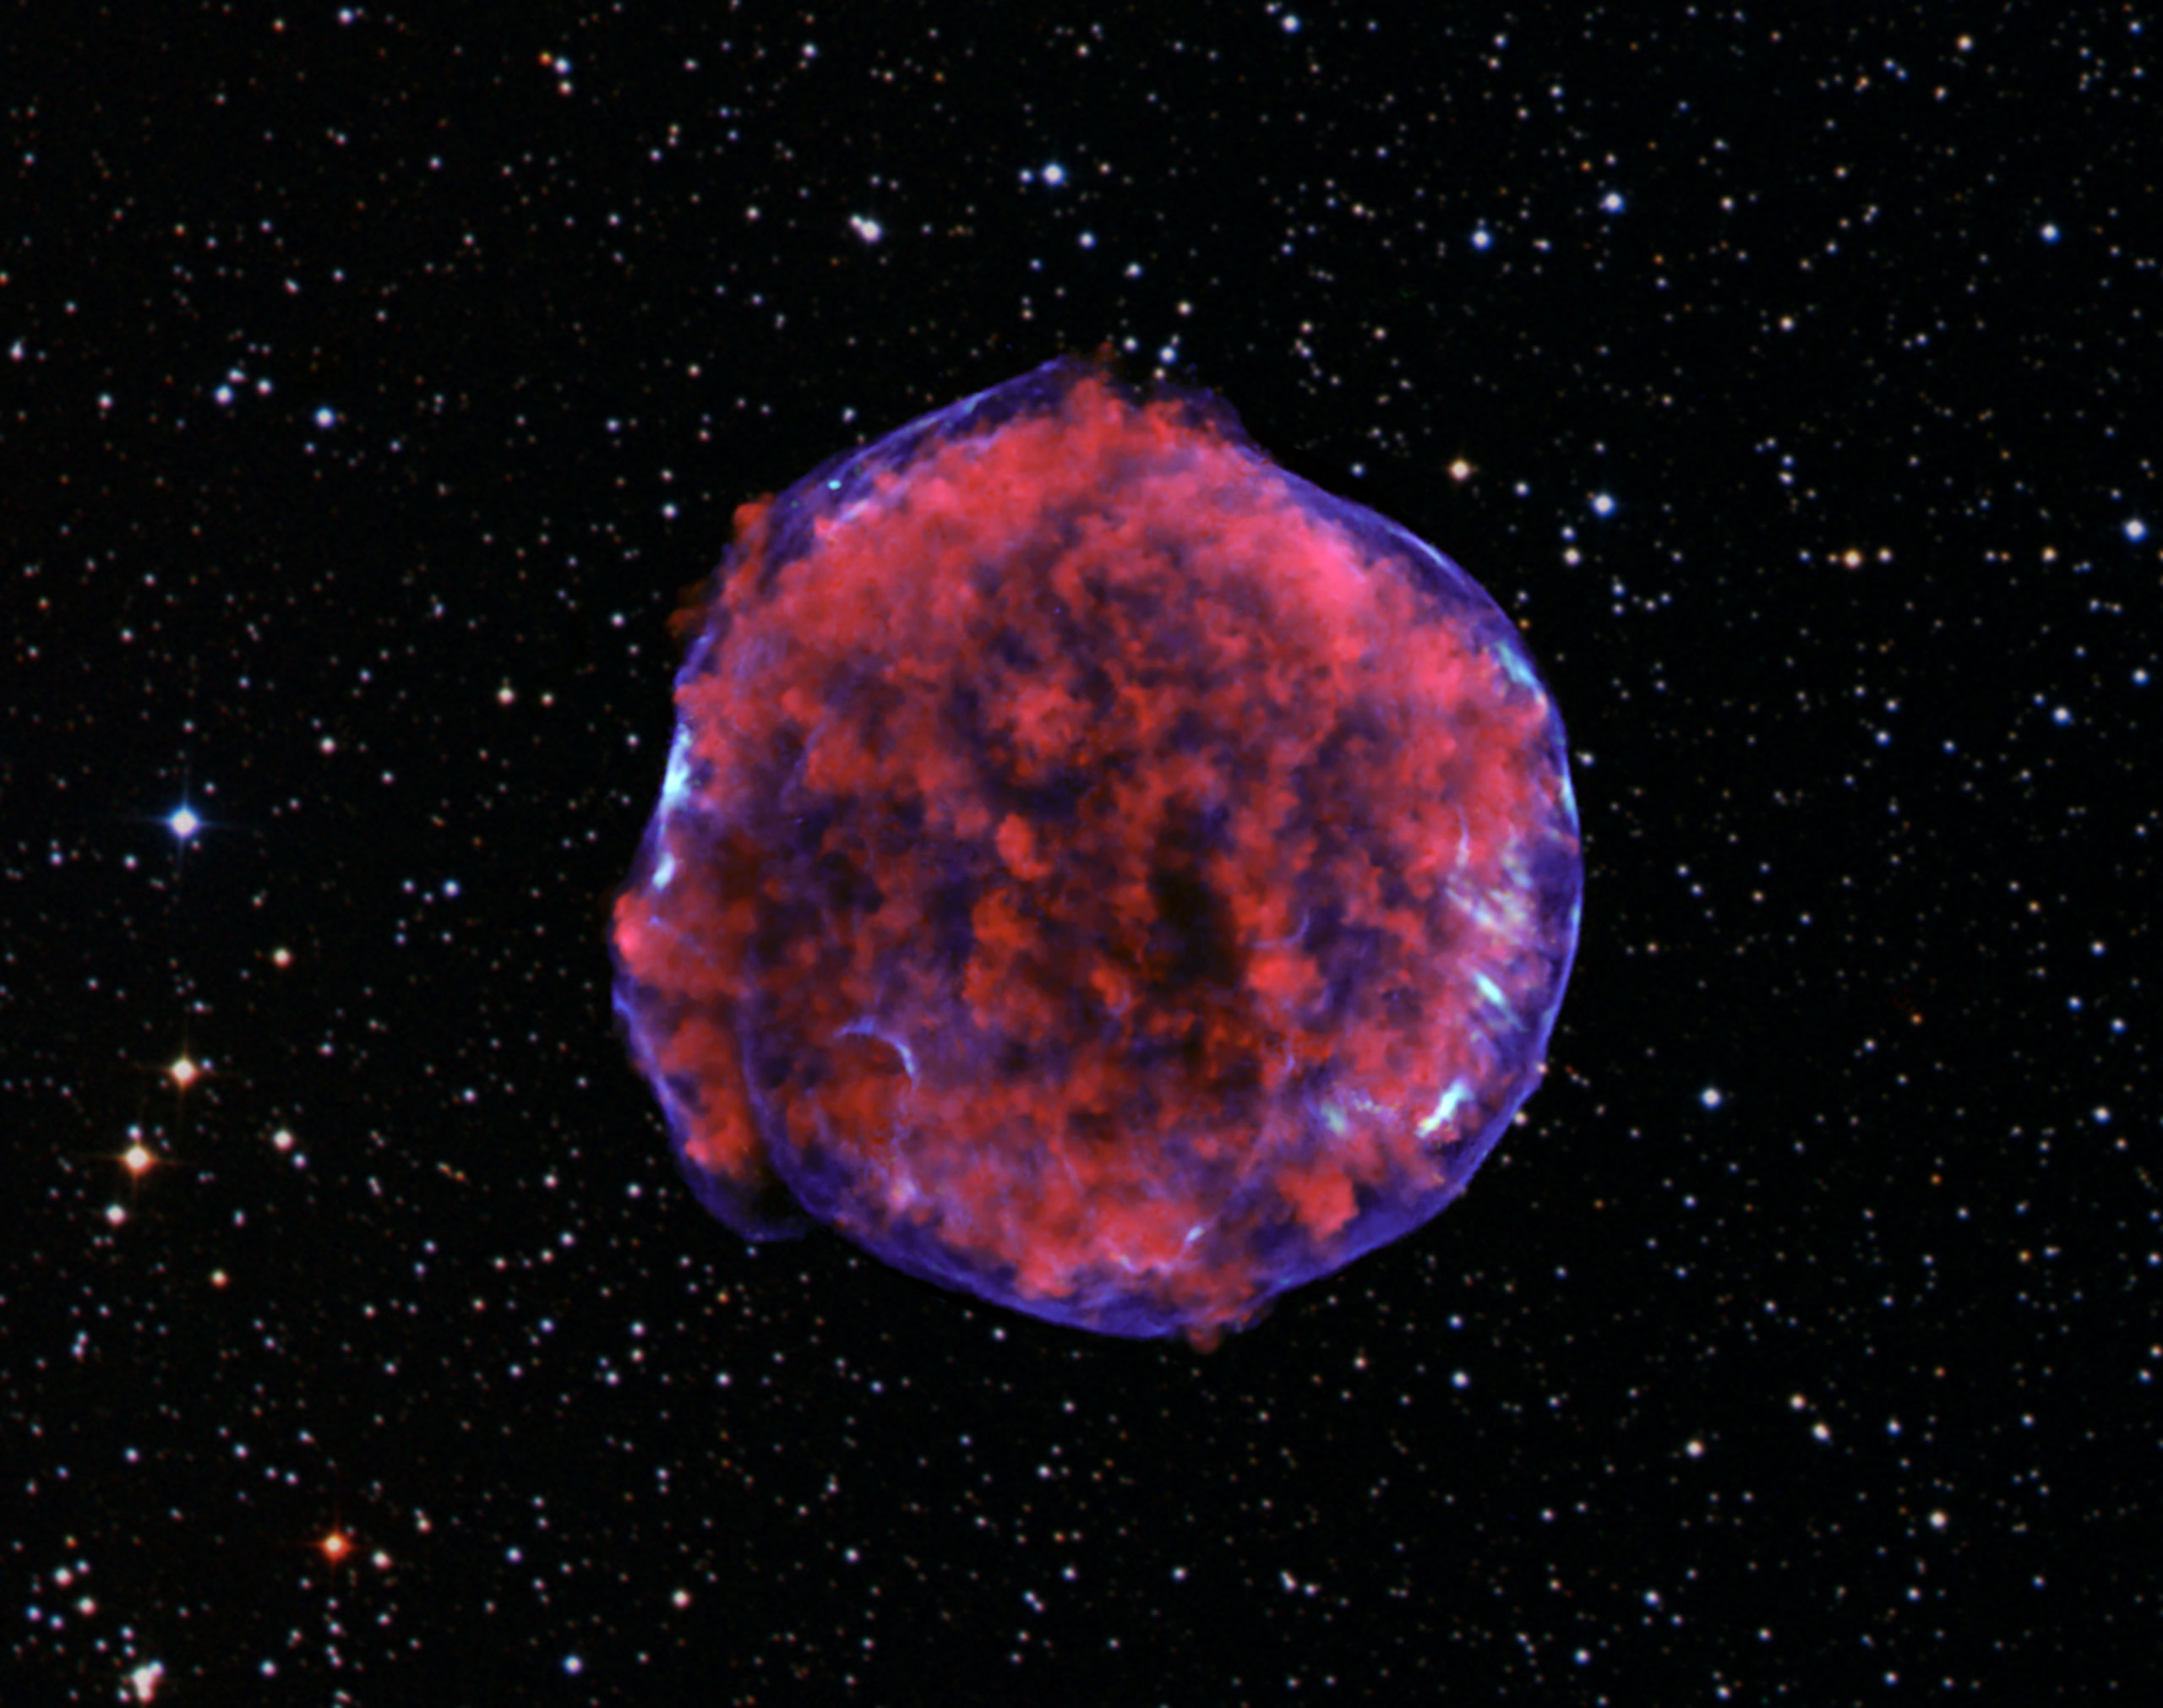 Zombie Star Tycho's supernova remnant is perhaps the most famous of the Type Ia supernovae, known as 'zombie' stars, which are white dwarves that feed off of stellar neighbors.